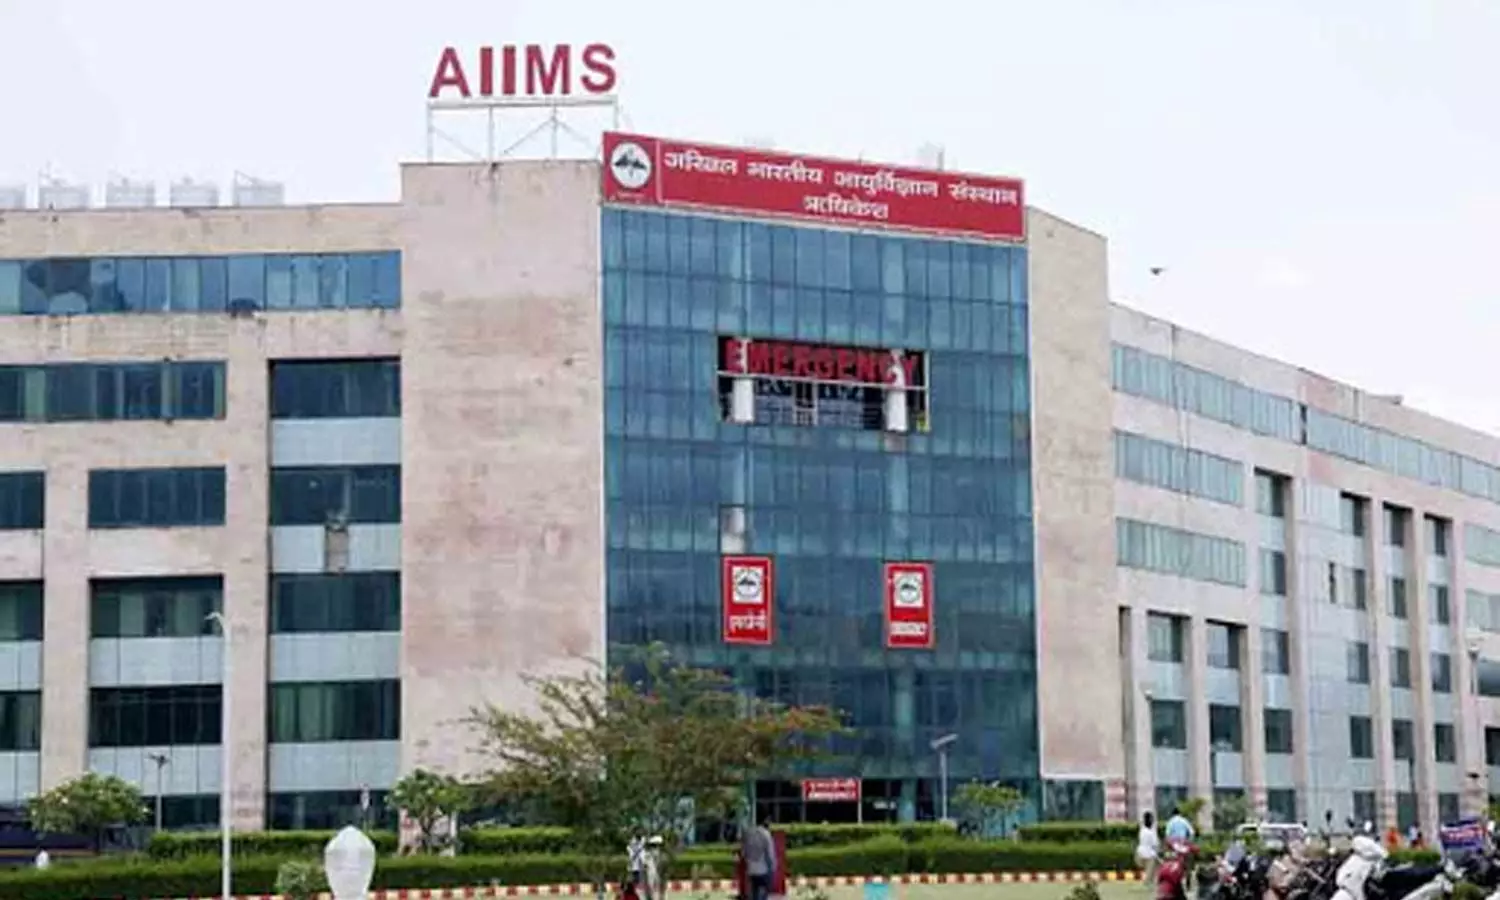 AIIMS Rishikesh : CBI seized documents due to alleged irregularities in appointments